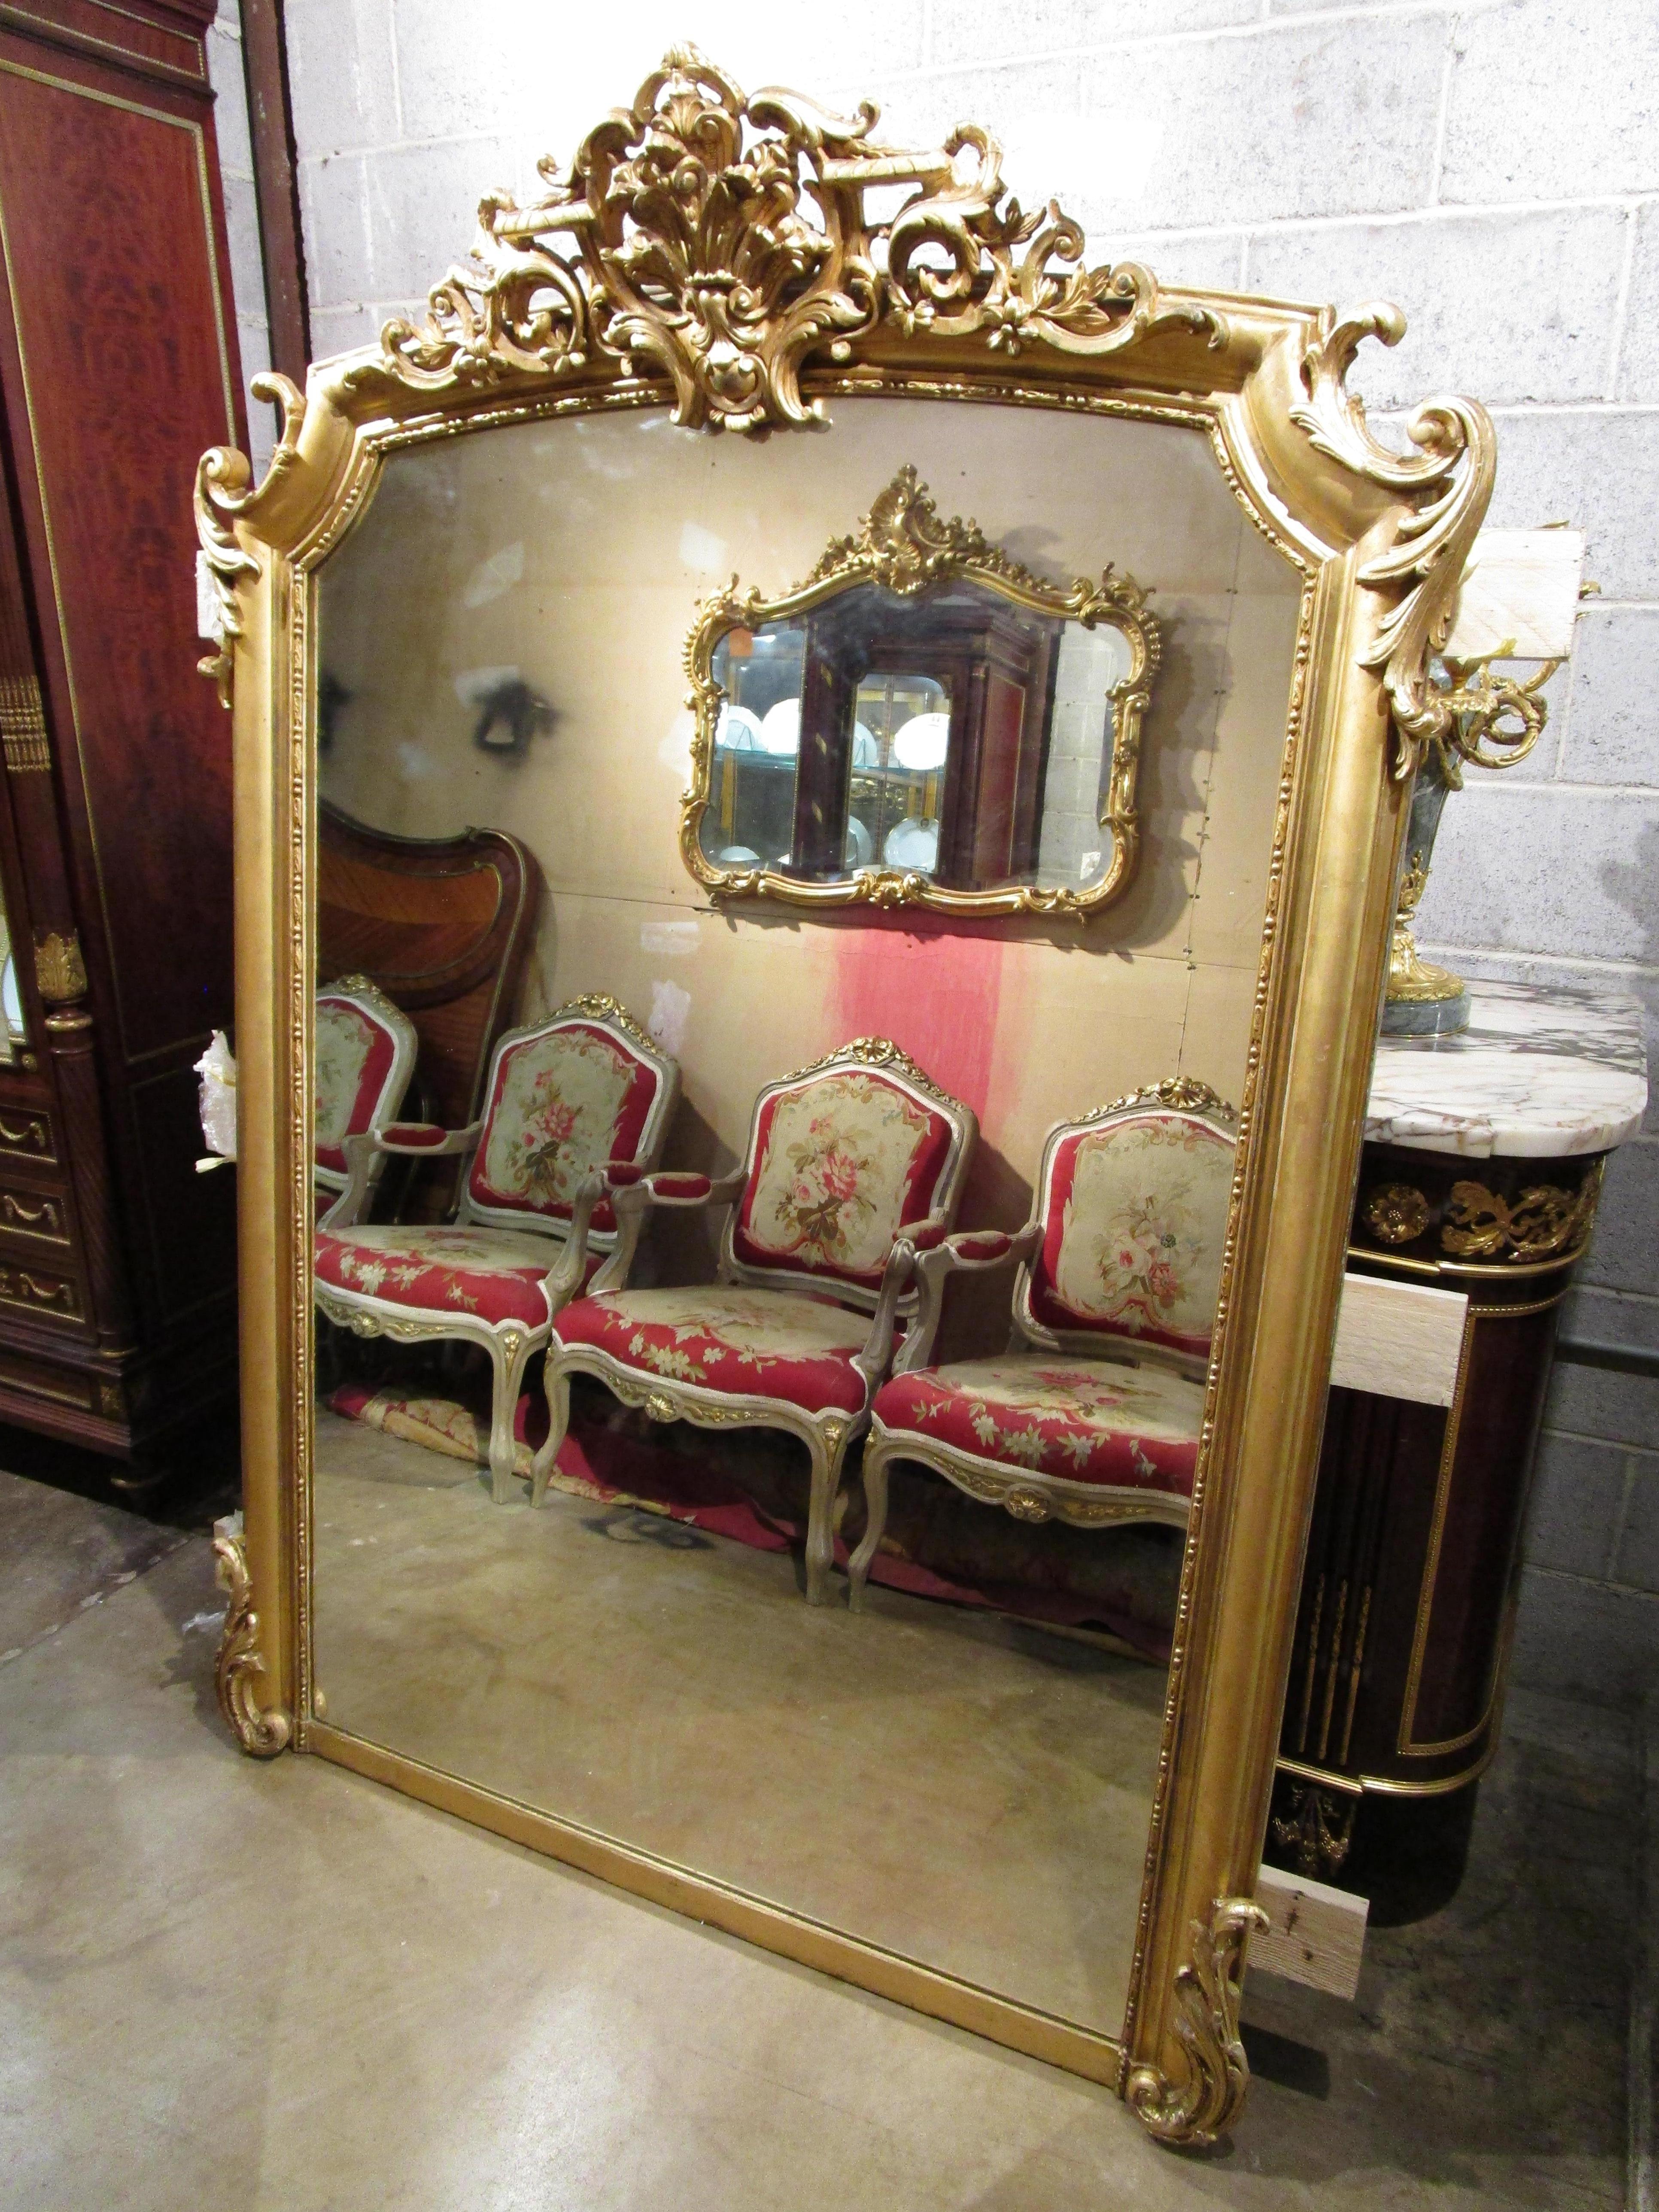 A very fine Regence 19th century hand carved and gilt large mirror.